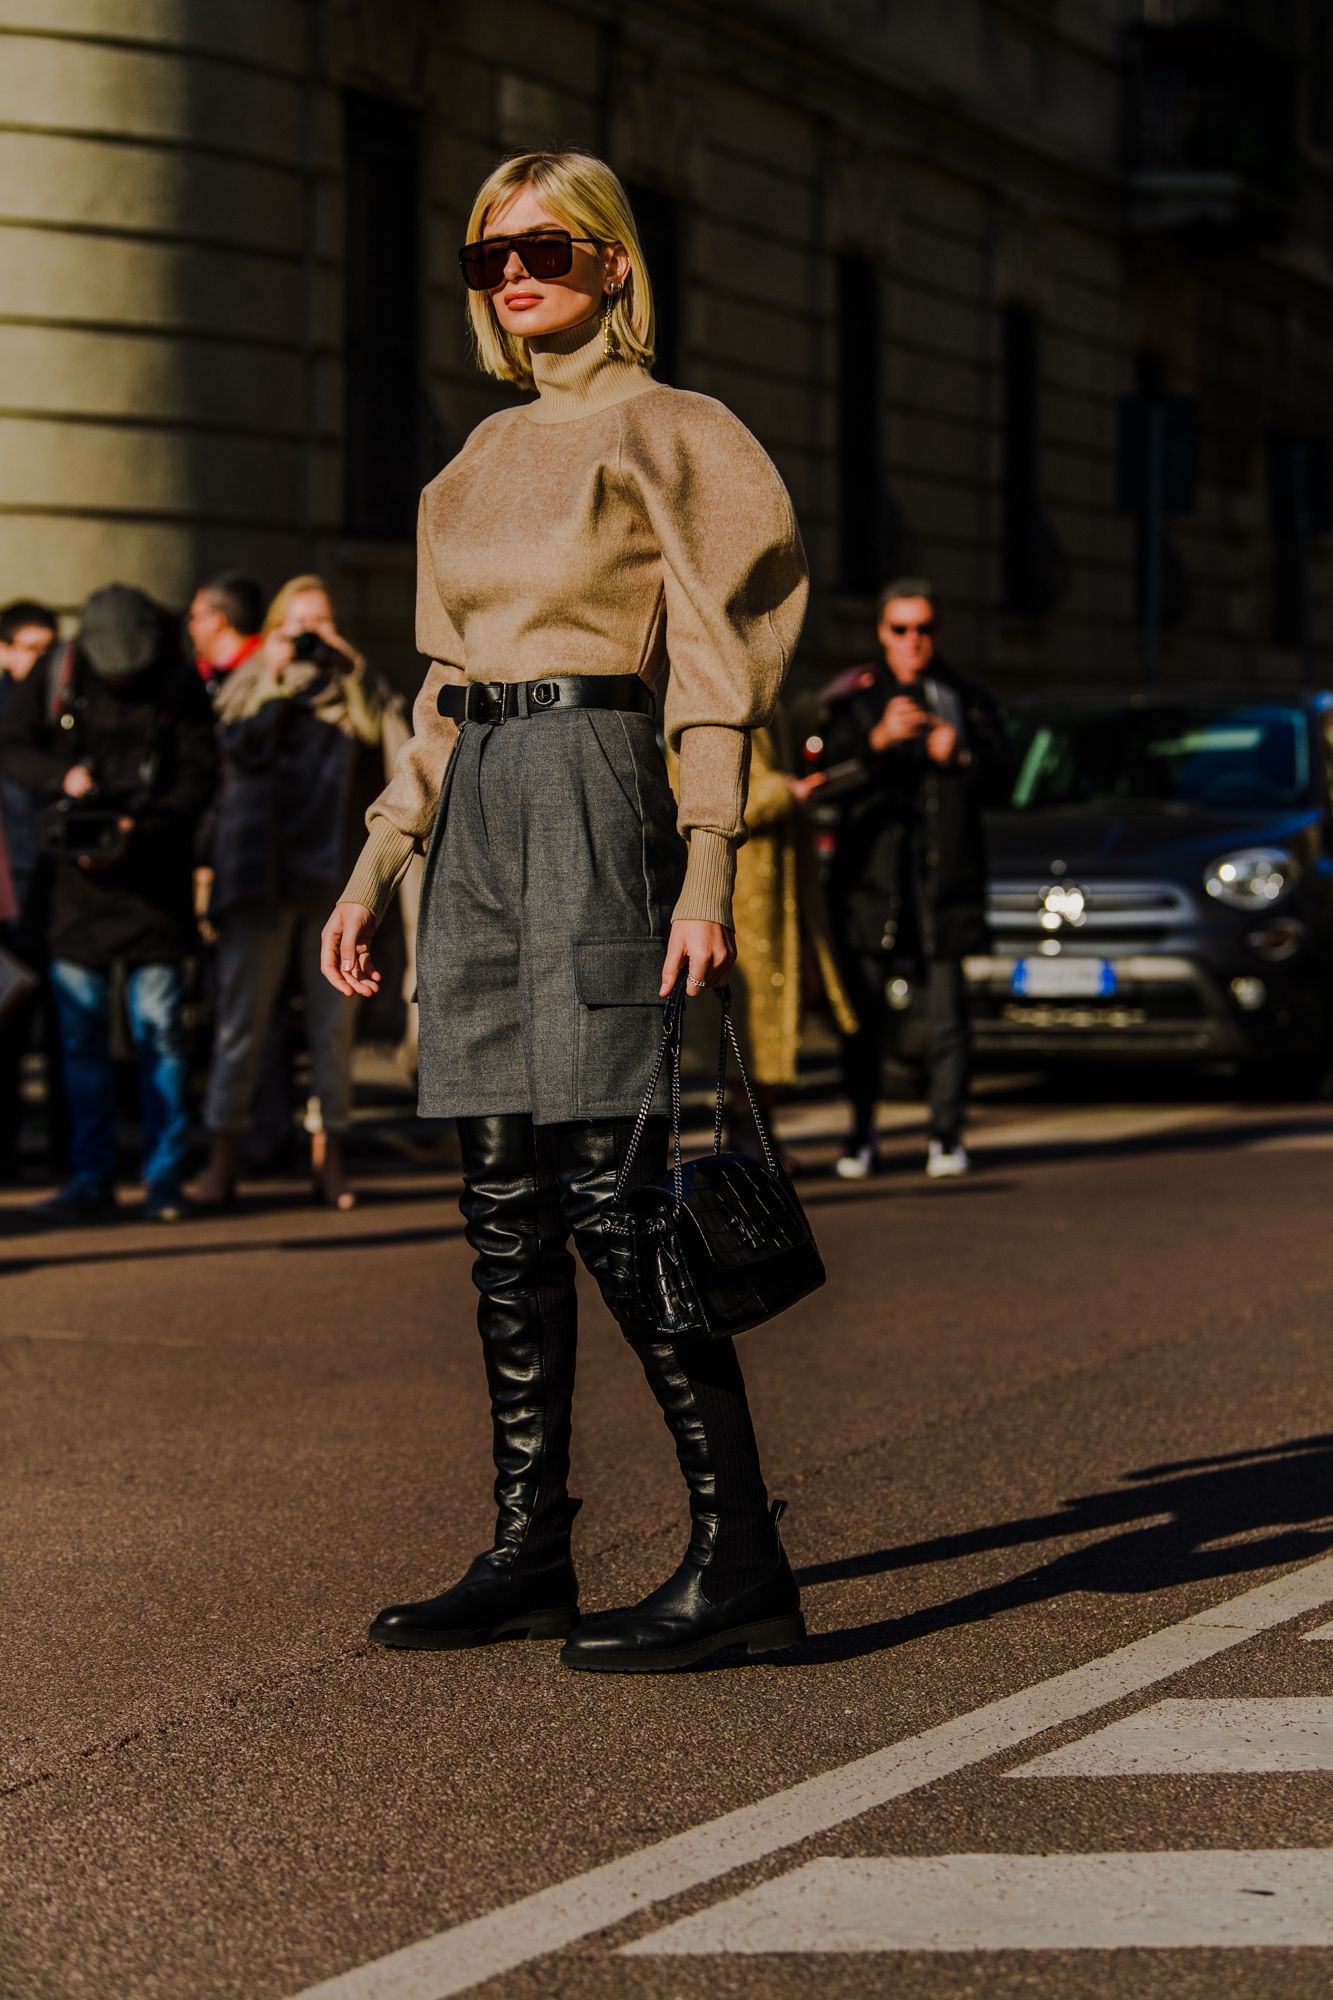 The Best Street Style at Milan Fashion Week AW20 - MOJEH